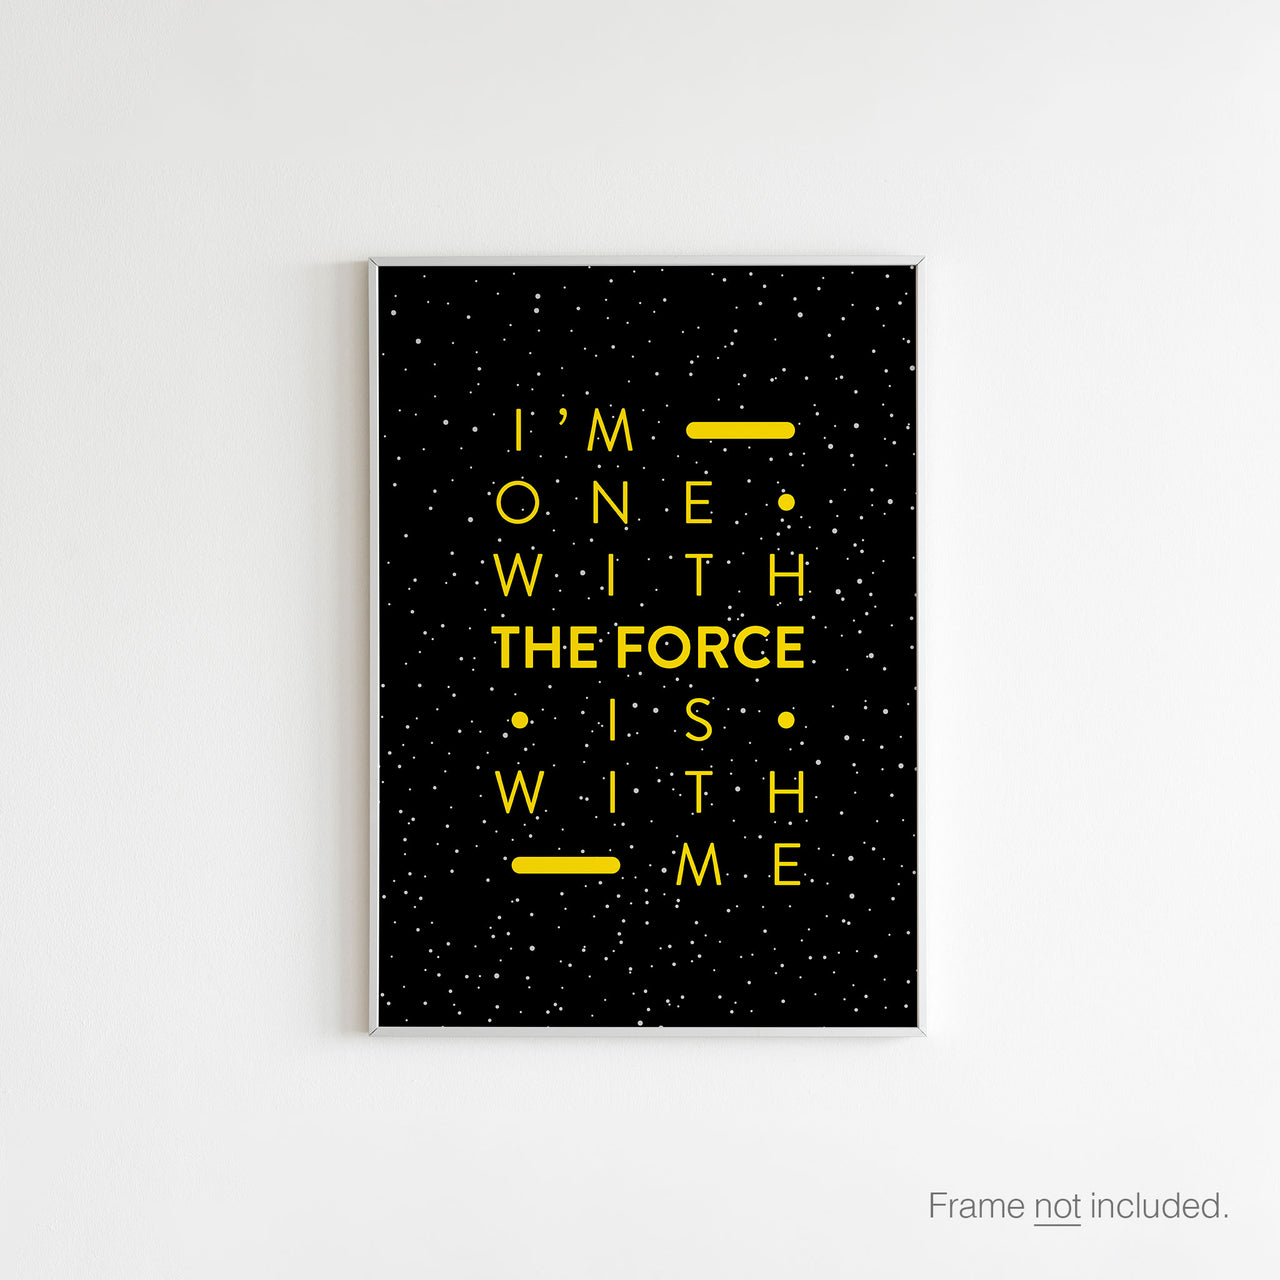 THE FORCE | POSTER PRINT